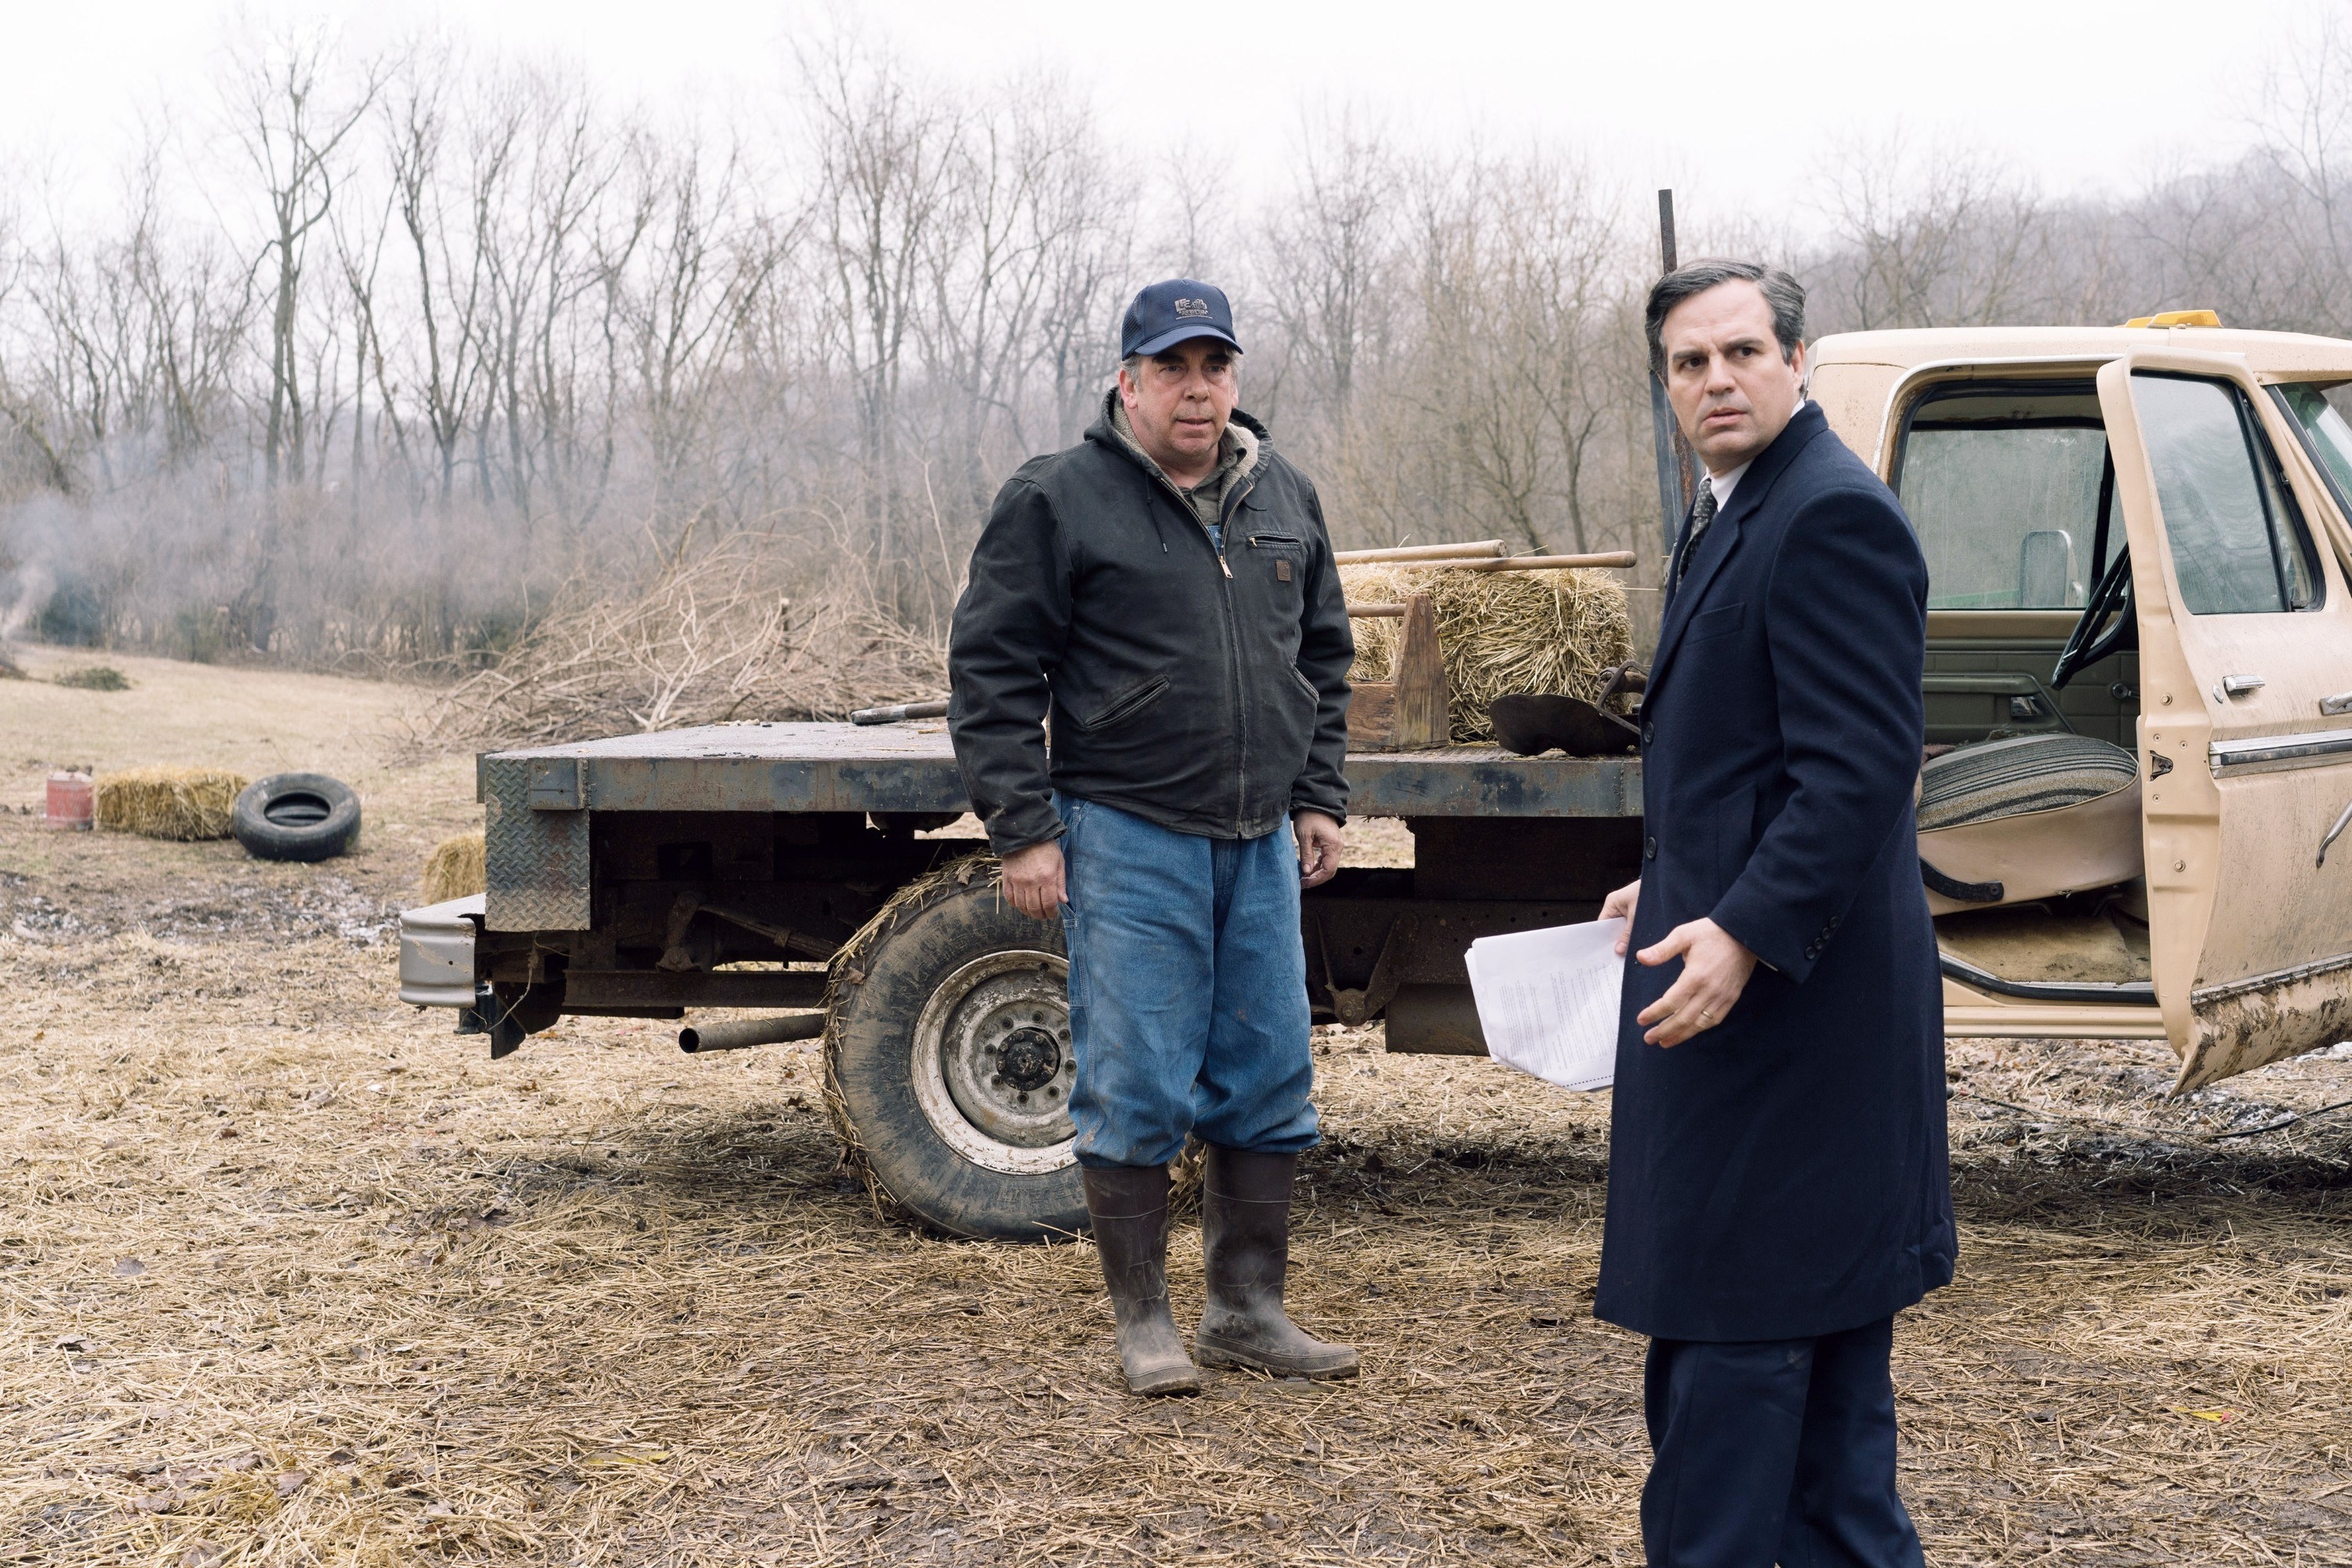 Bill Camp and Mark Ruffalo stand by a truck in a field